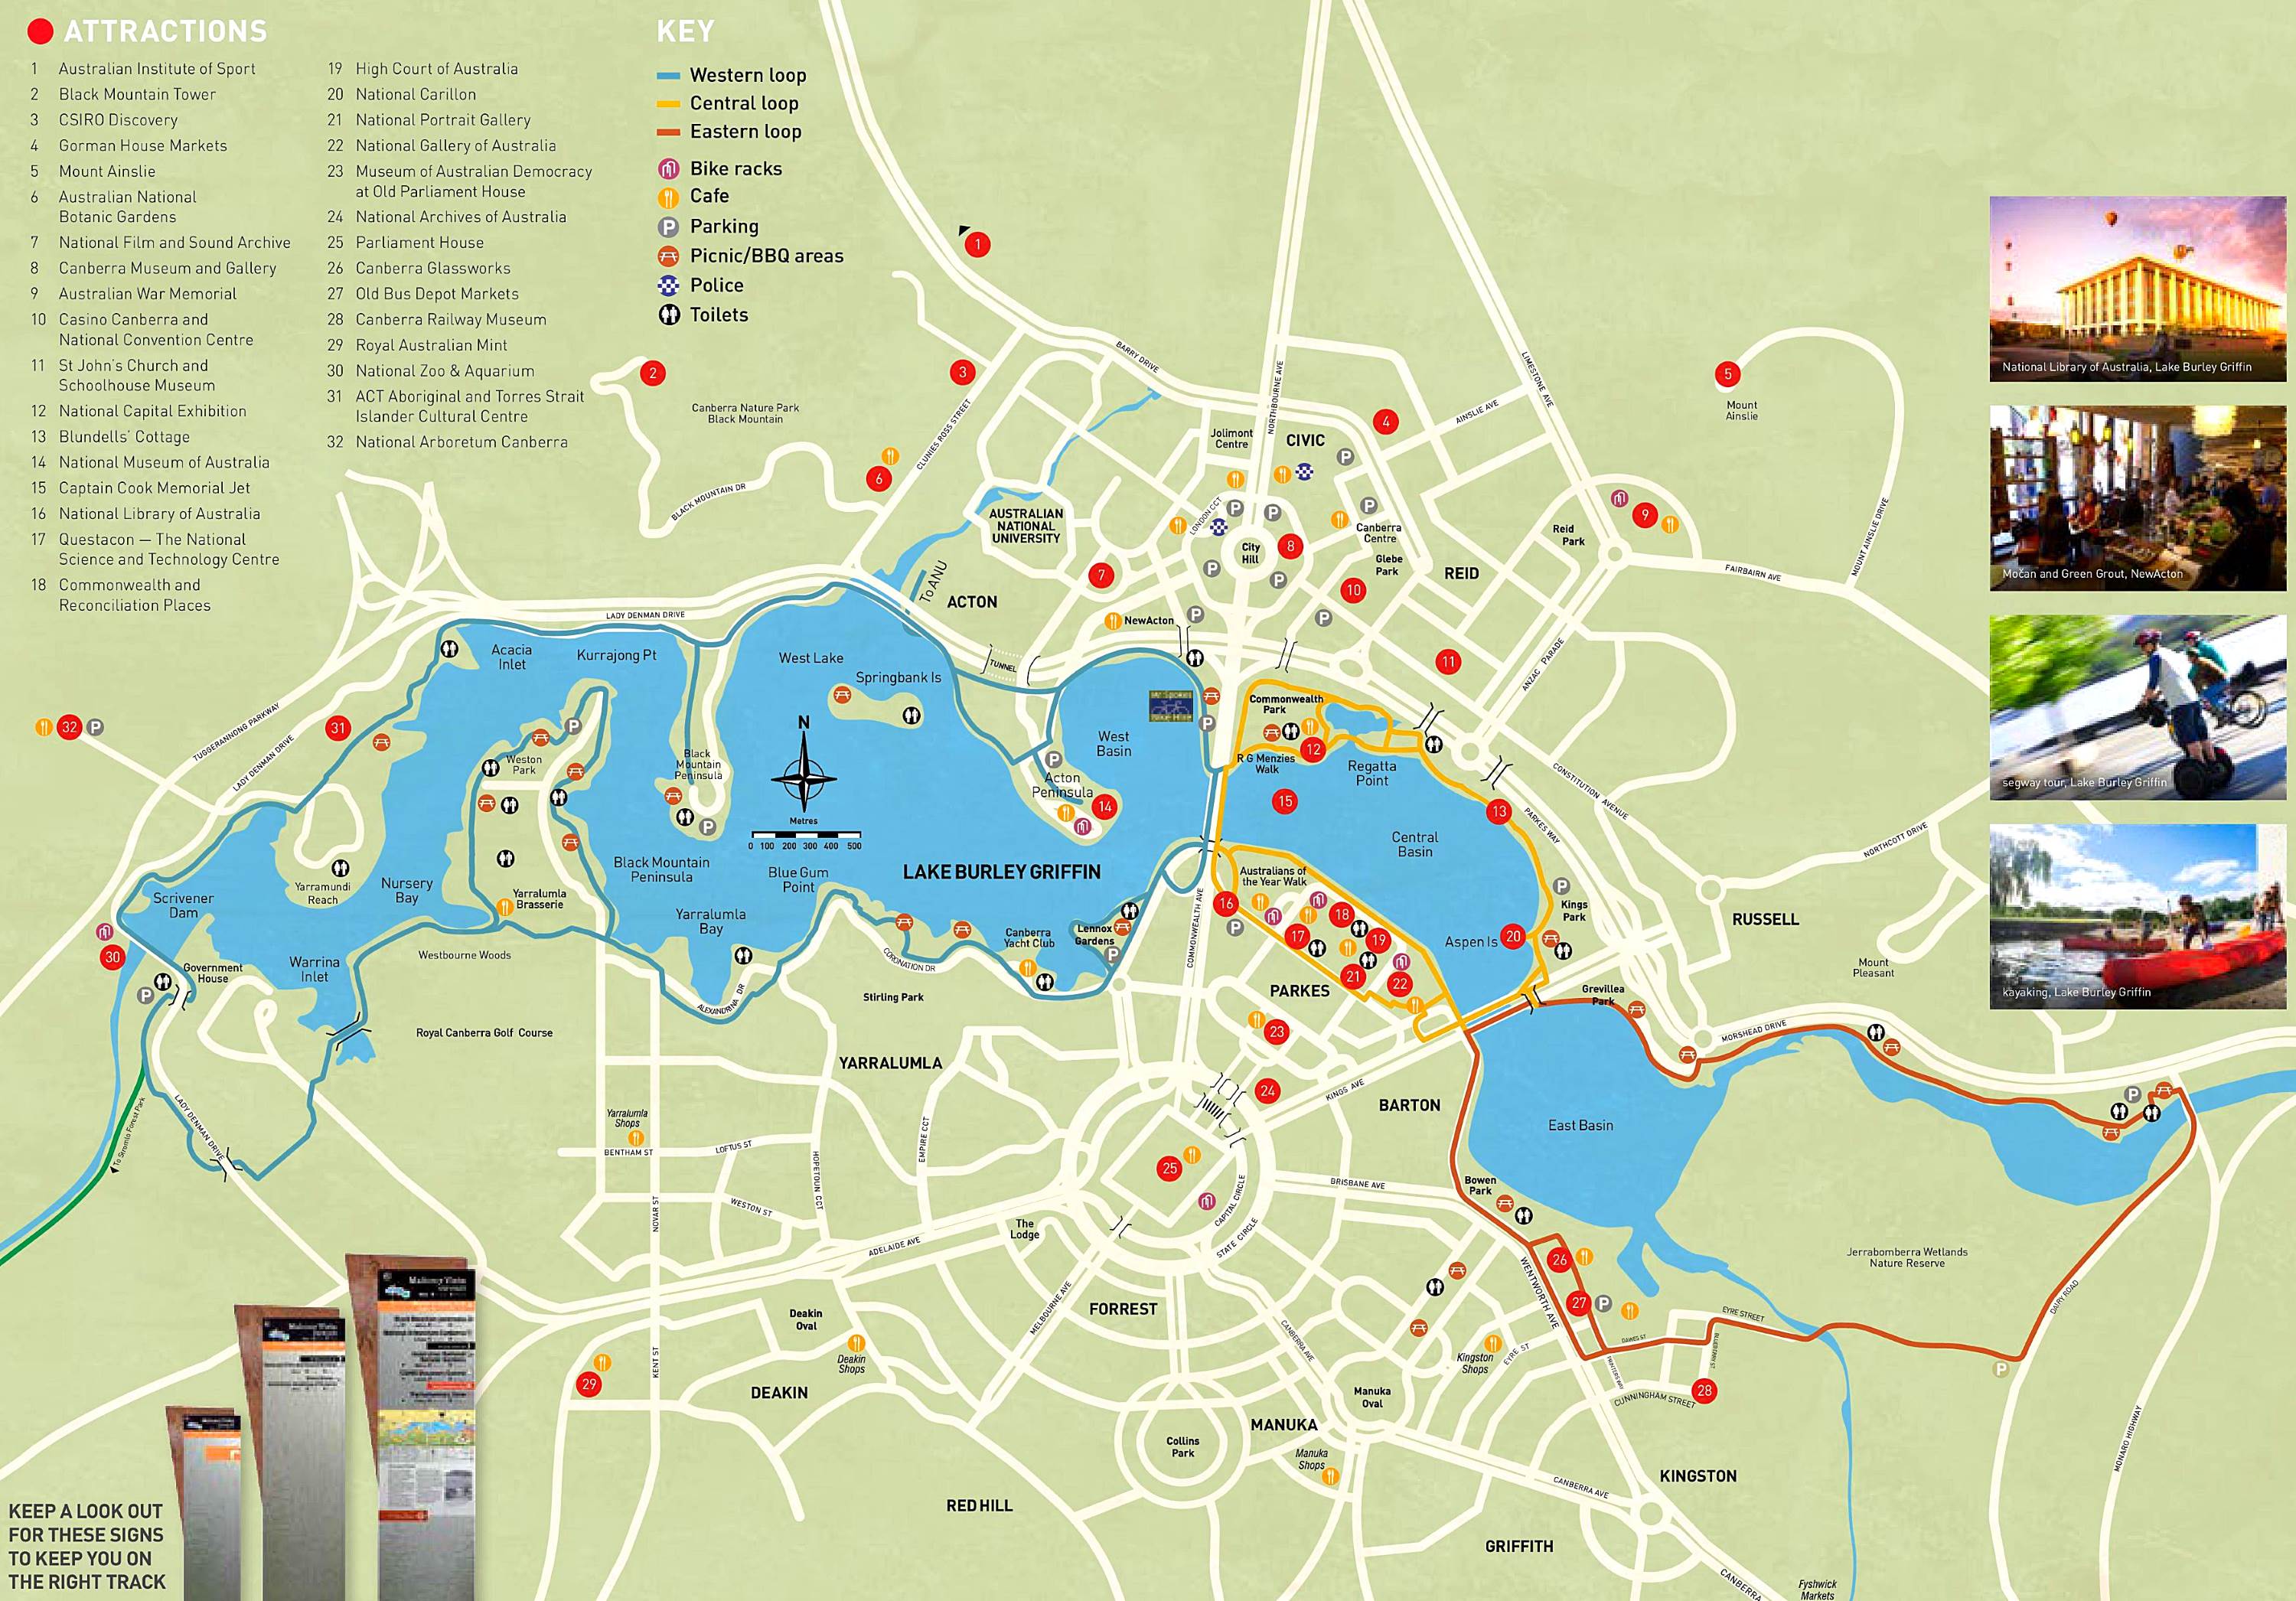 A map of sights in Canberra, Australia